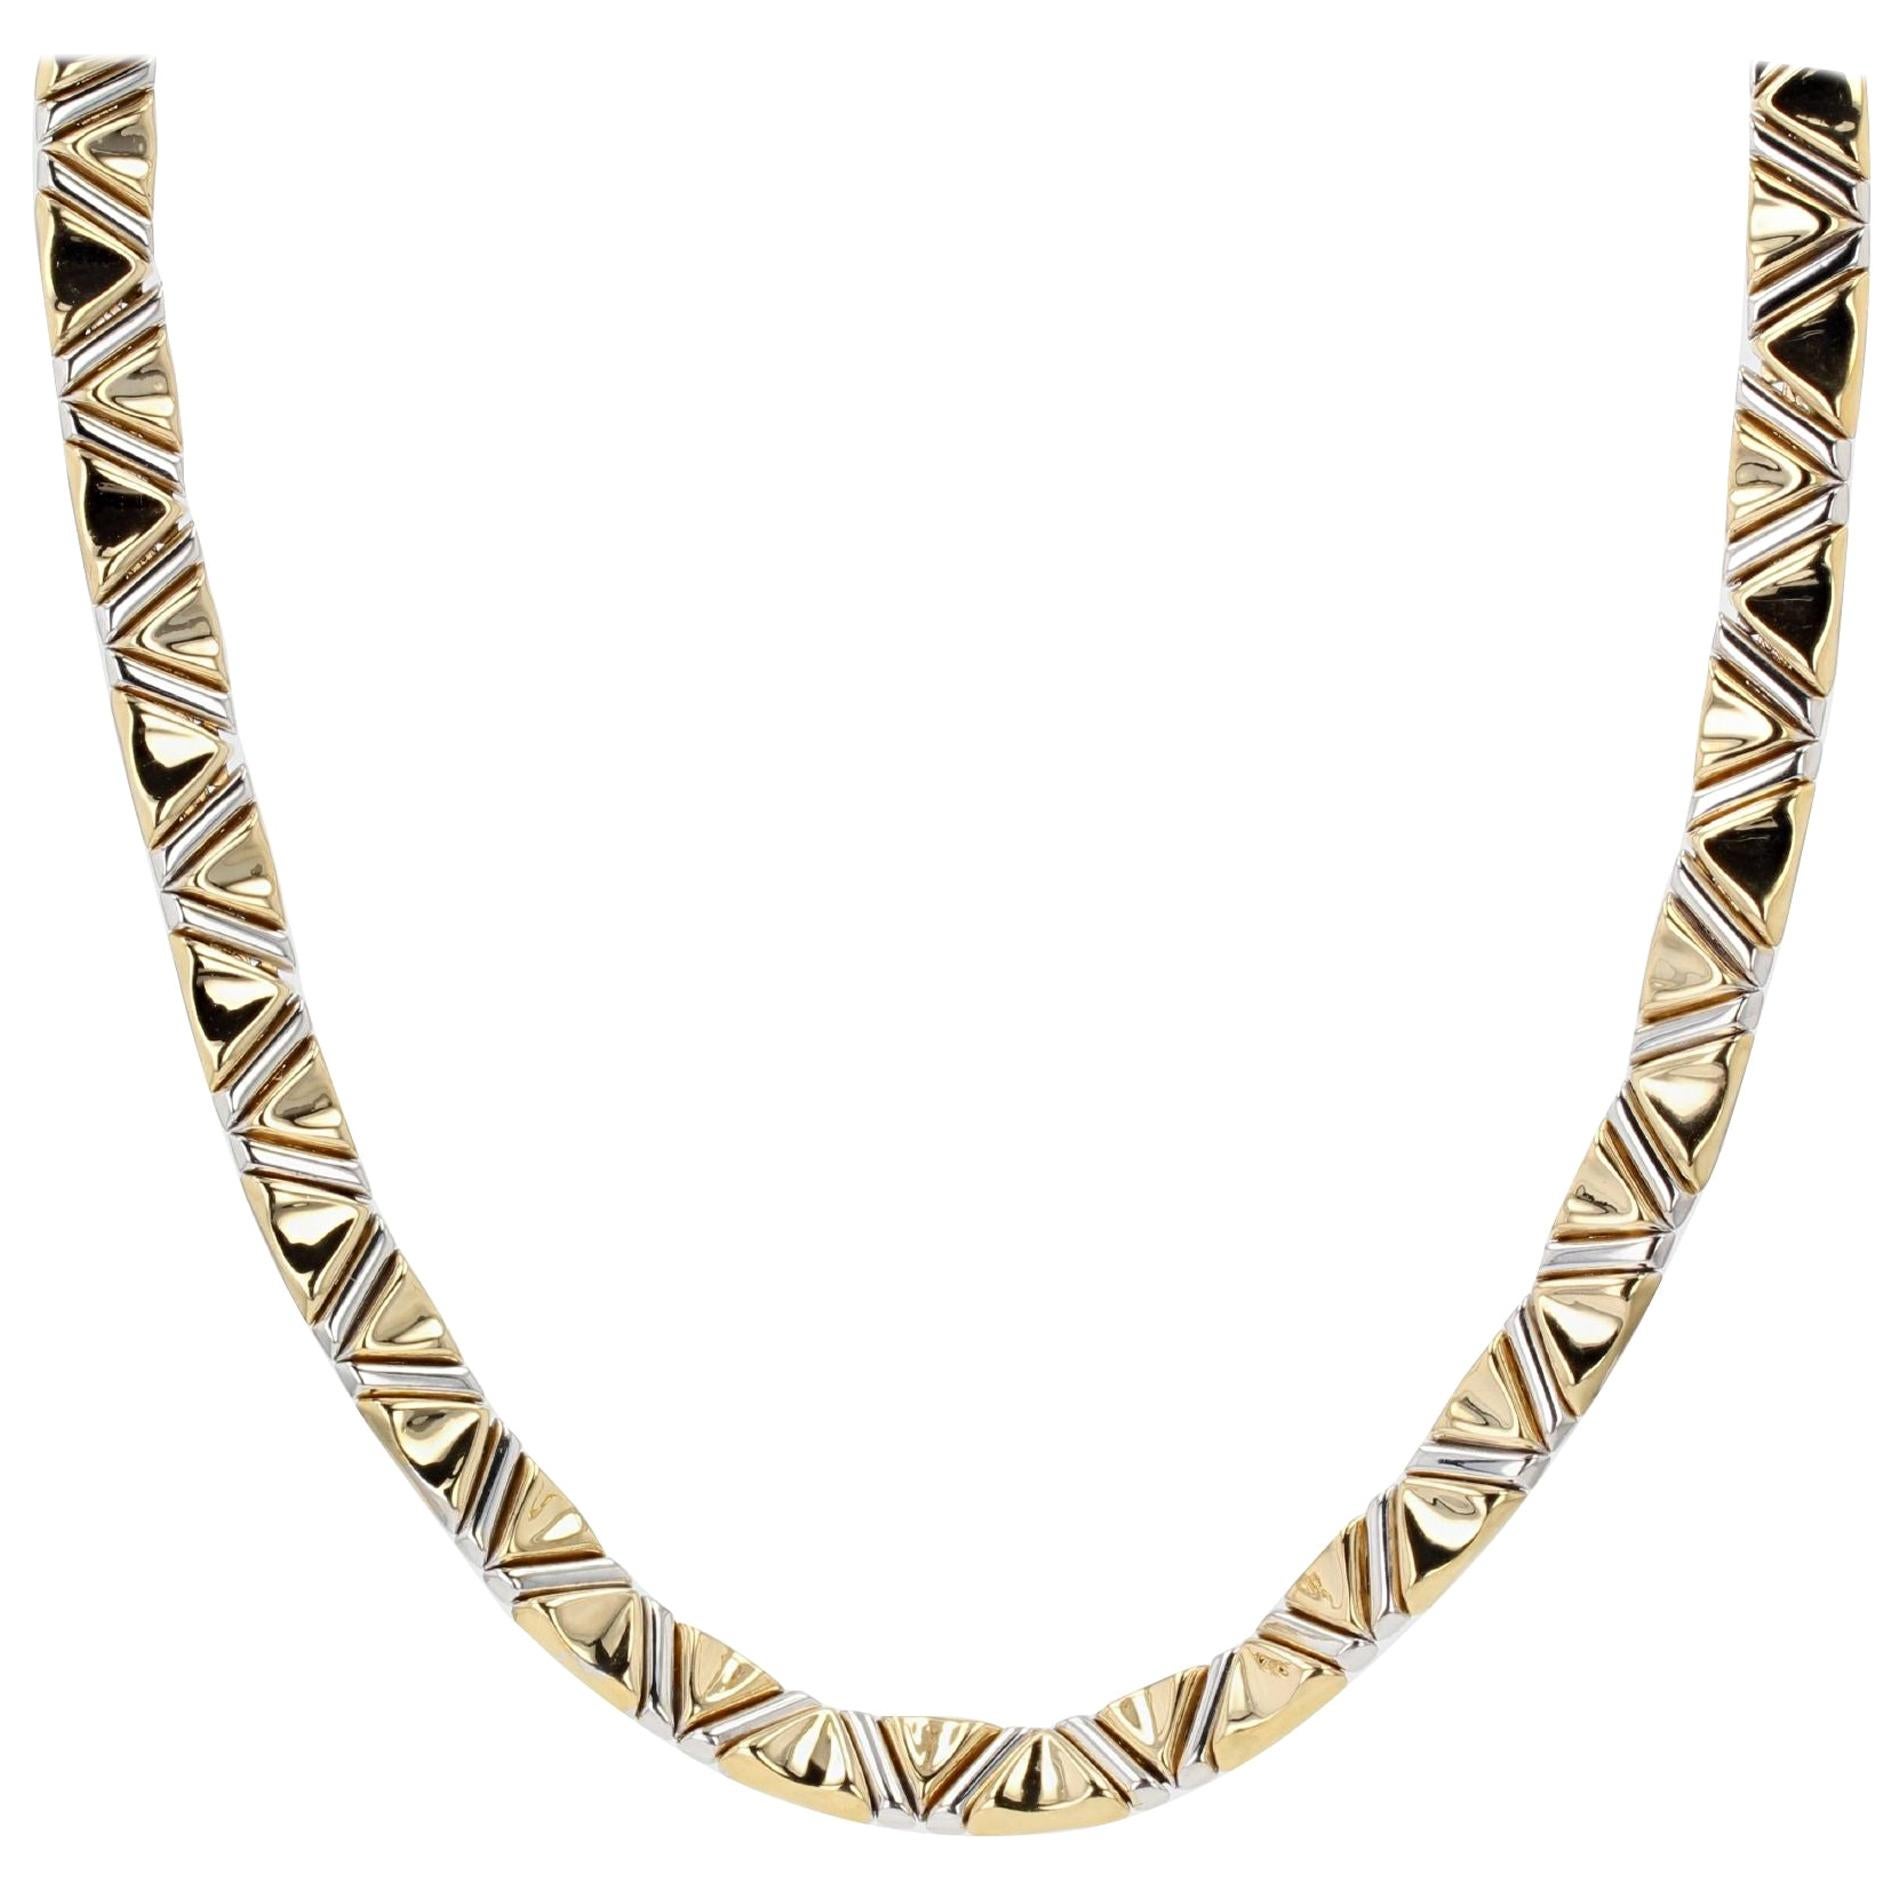 Modern 18 Karat Yellow and White Gold Marcello Bicego Necklace